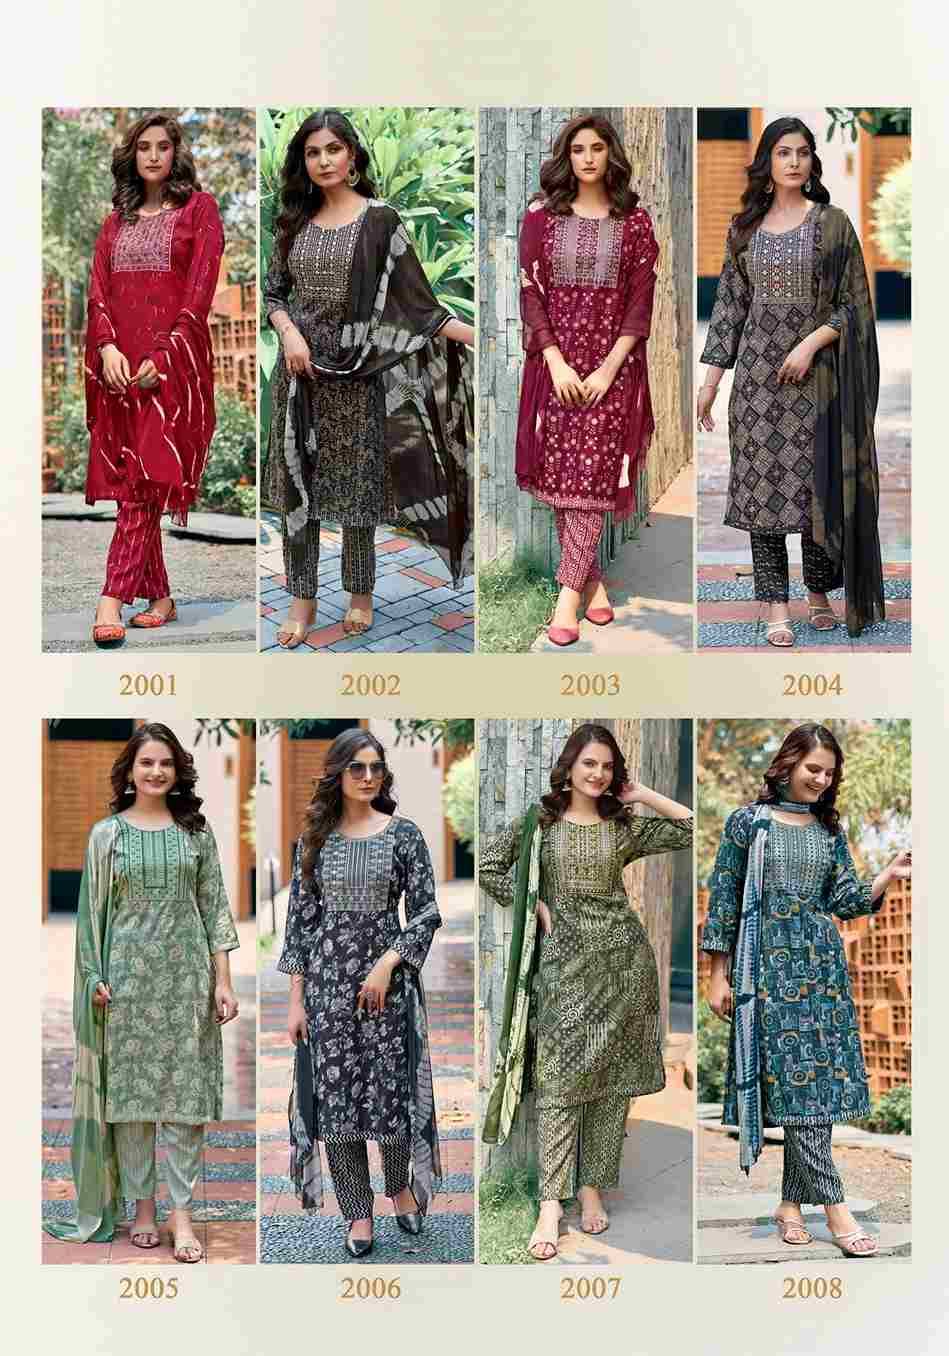 Shagun Vol-2 By Mystic 9 2001 To 2008 Series Beautiful Festive Suits Colorful Stylish Fancy Casual Wear & Ethnic Wear Rayon Print Dresses At Wholesale Price